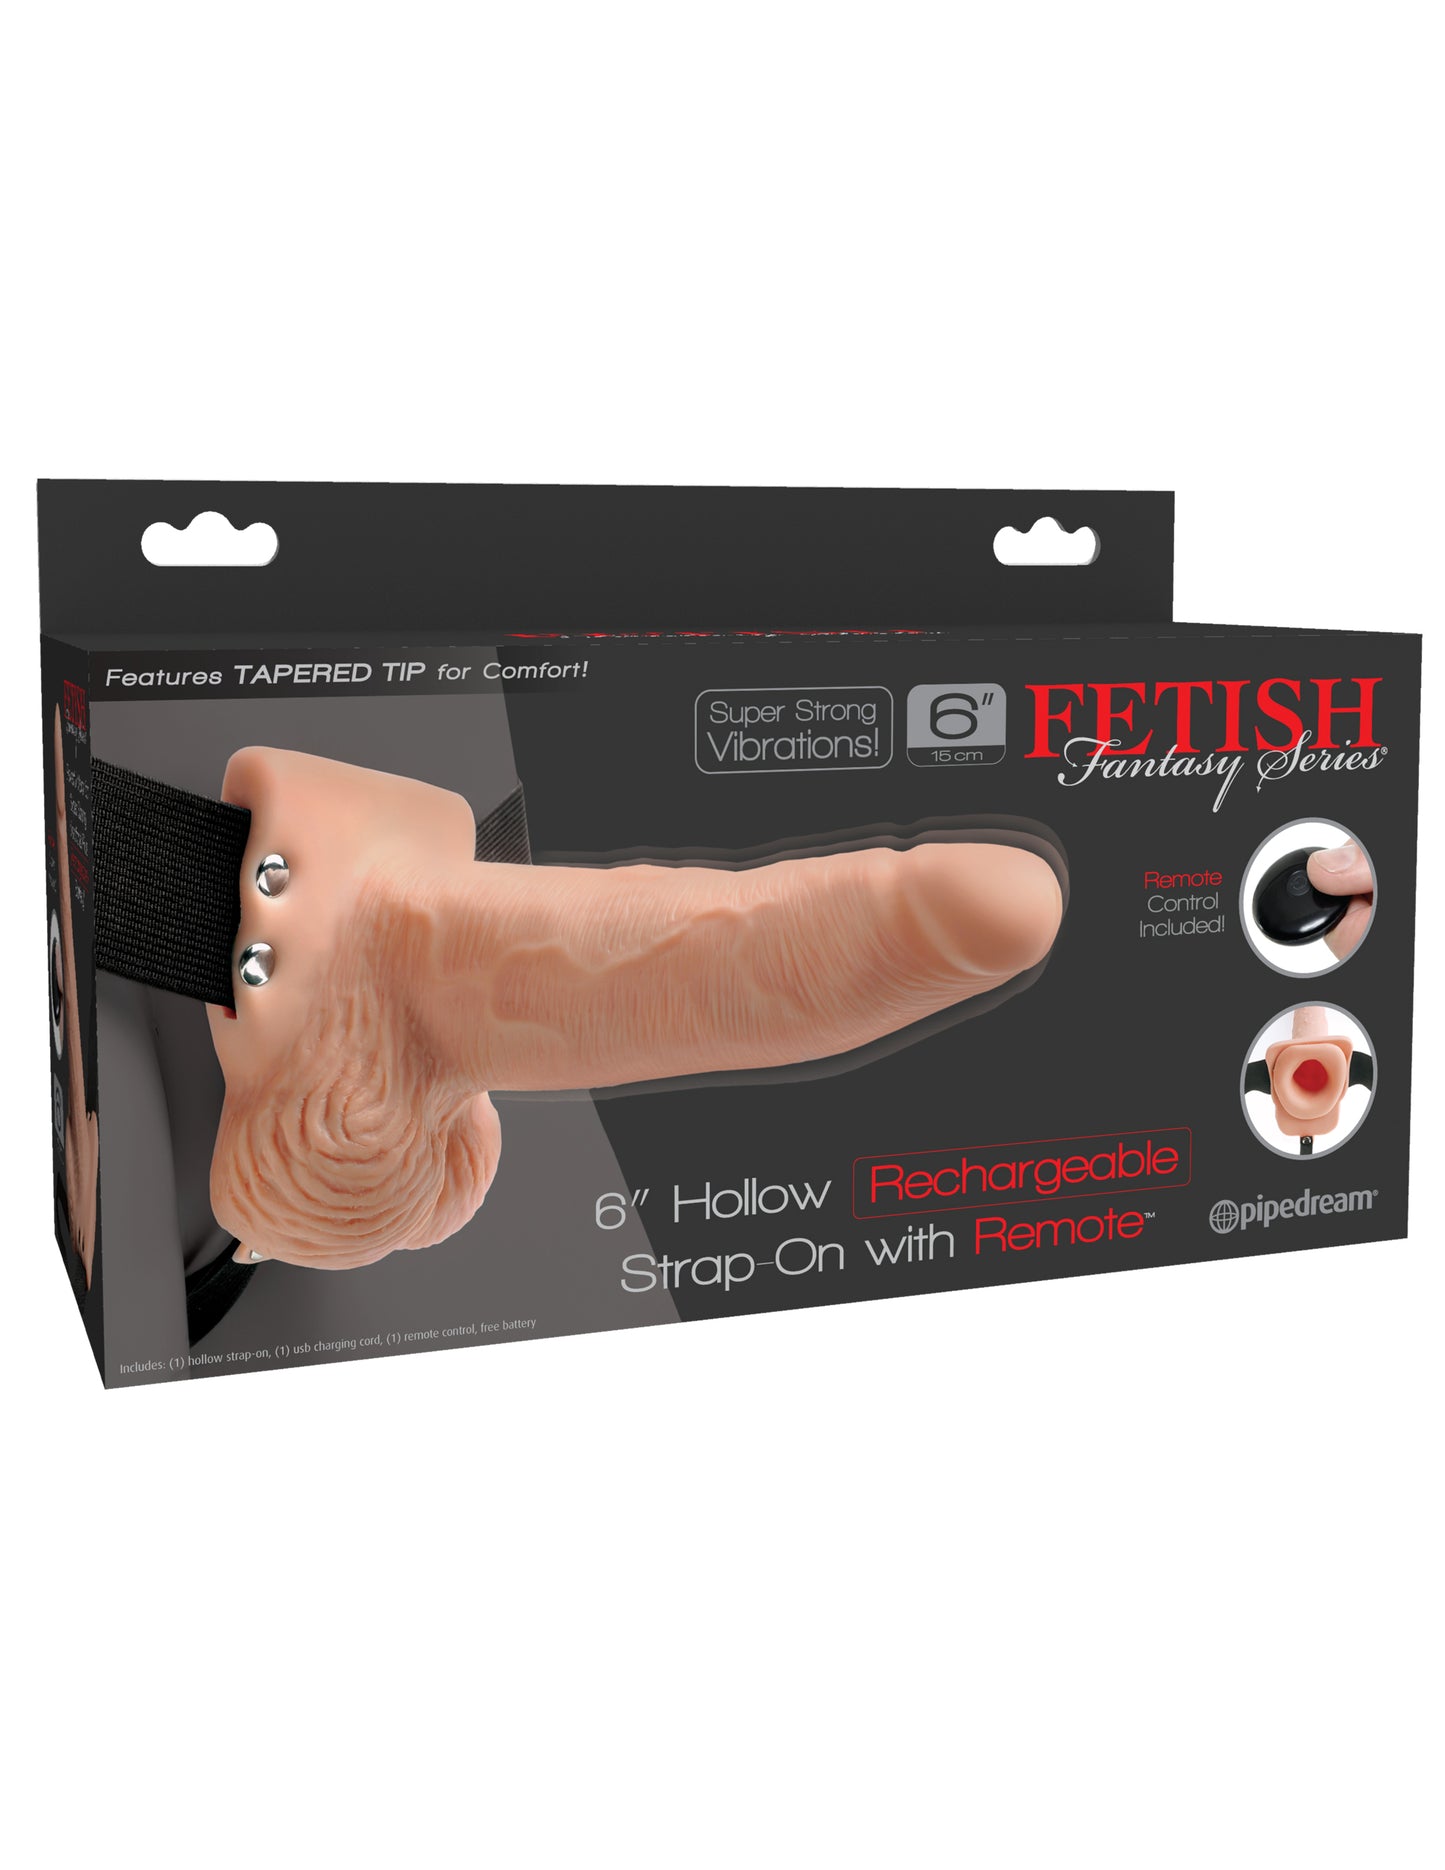 6" Fetish Fantasy Hollow Rechargeable Strap-on with Remote